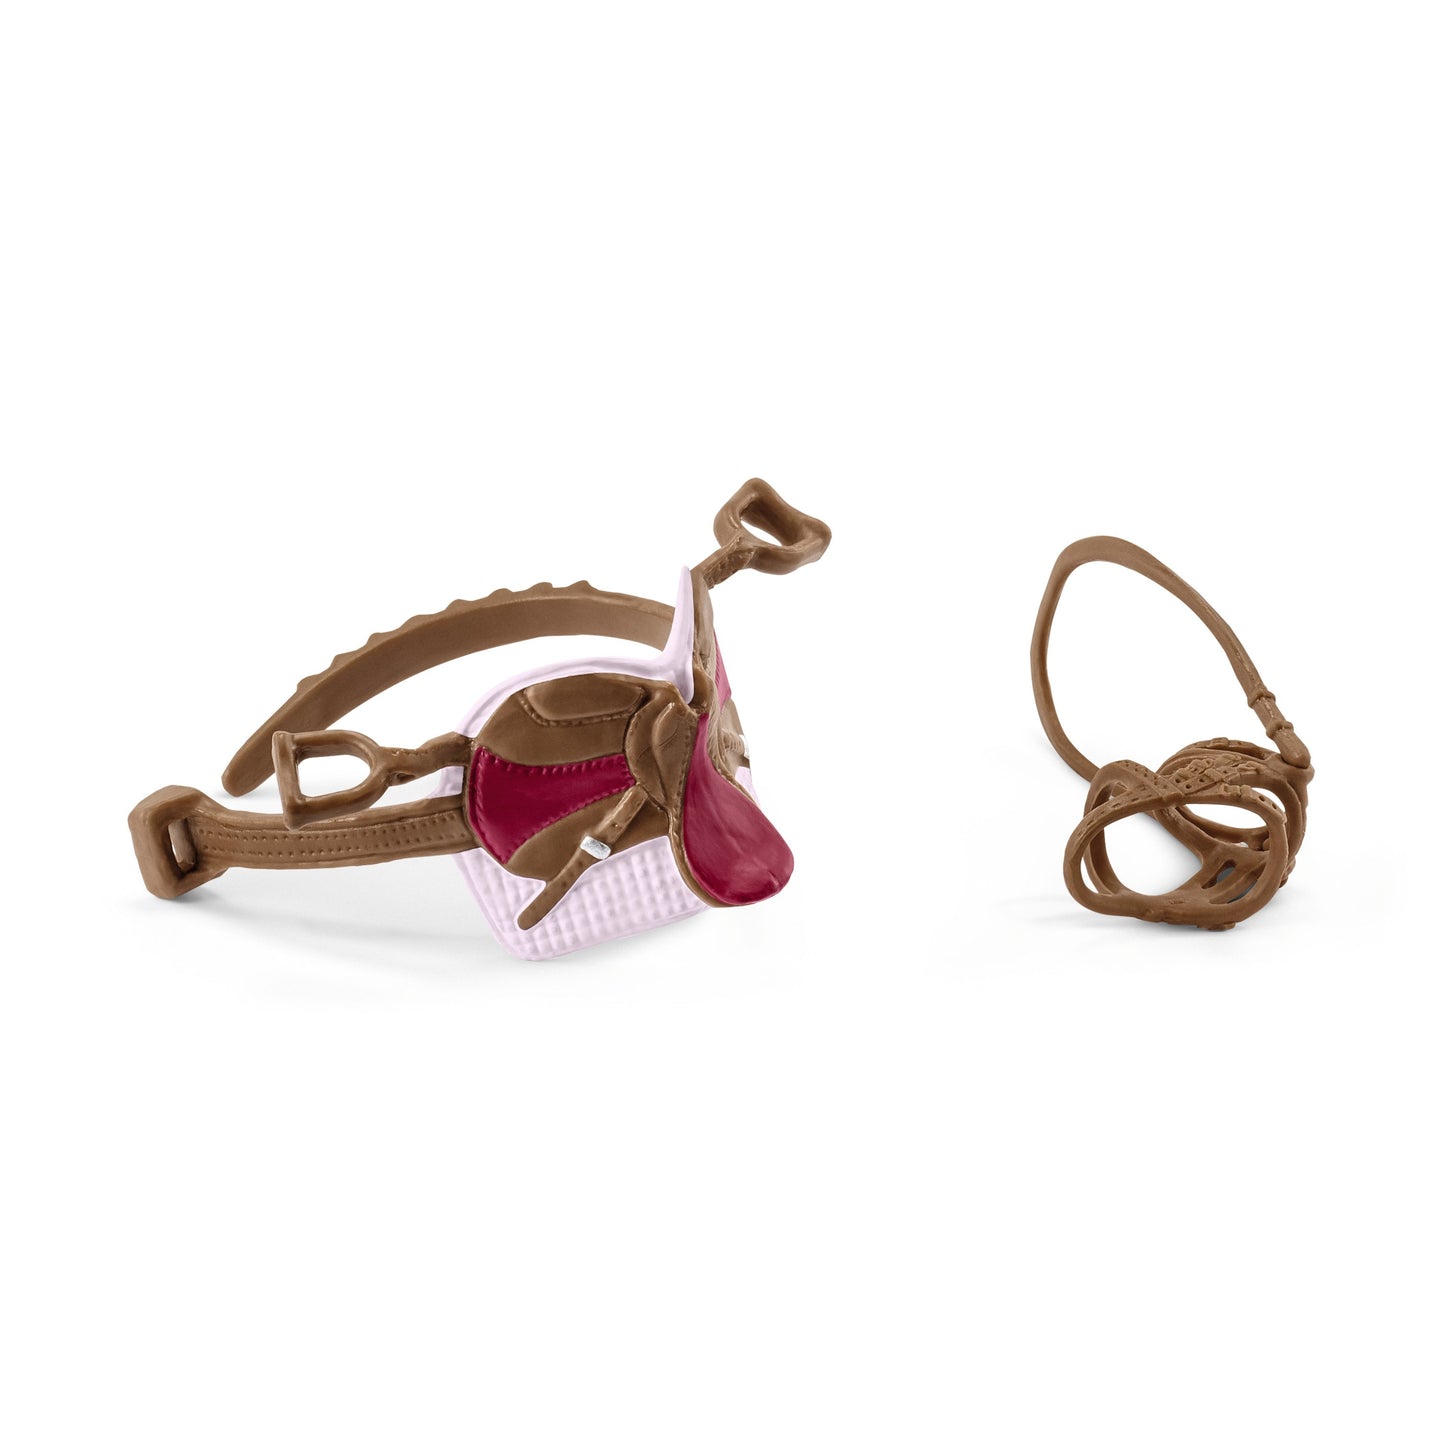 SL42490 Schleich Saddle and Bridle - Pink Saddle Cloth